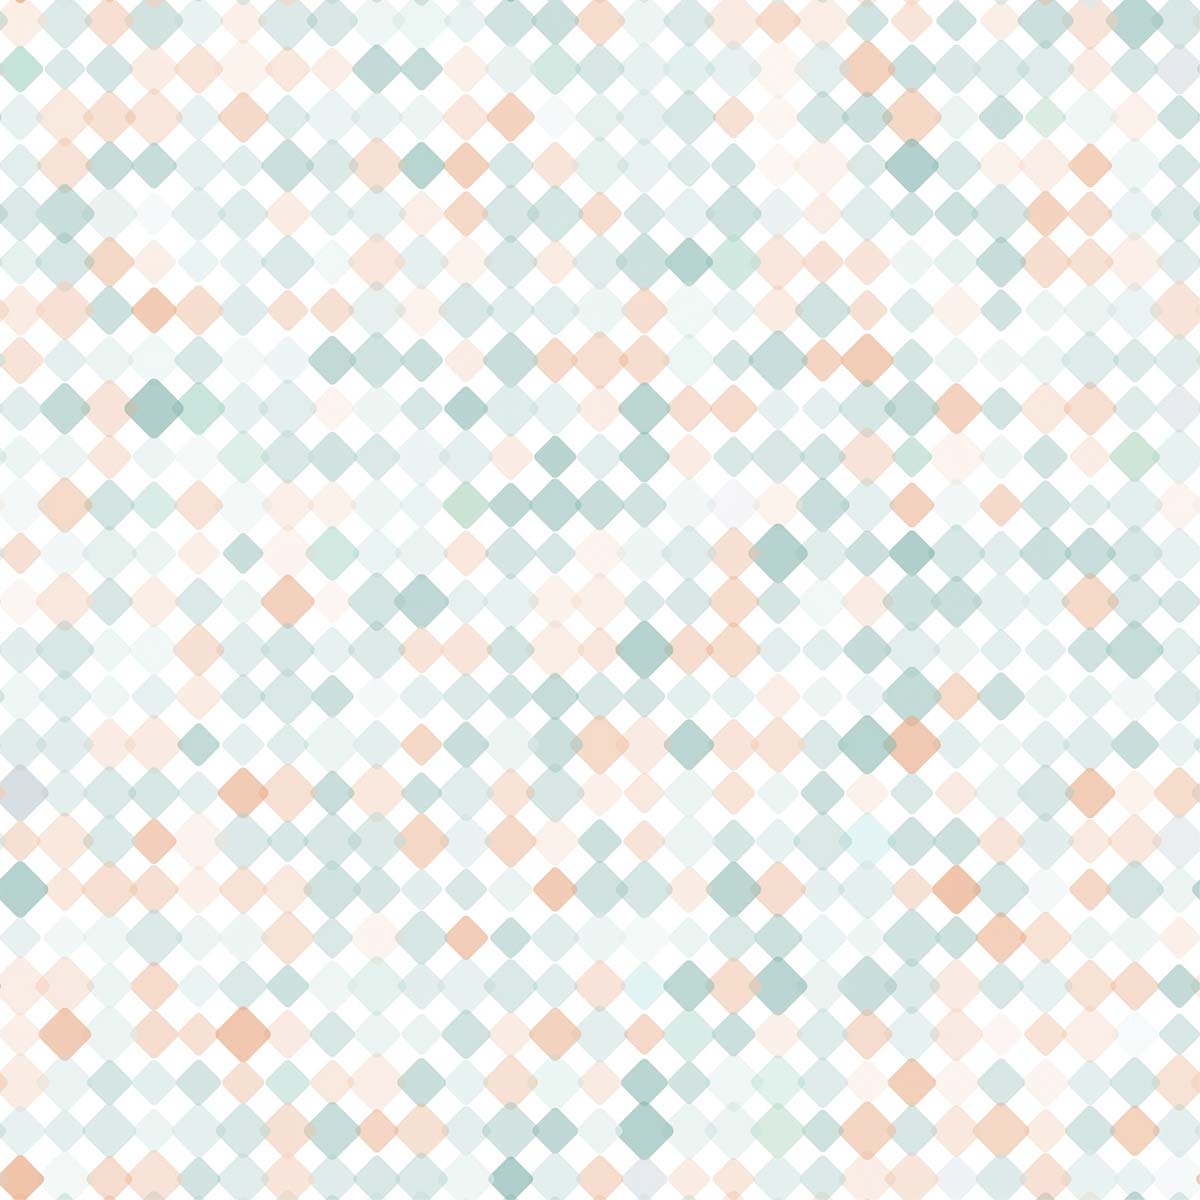 A pattern of small squares